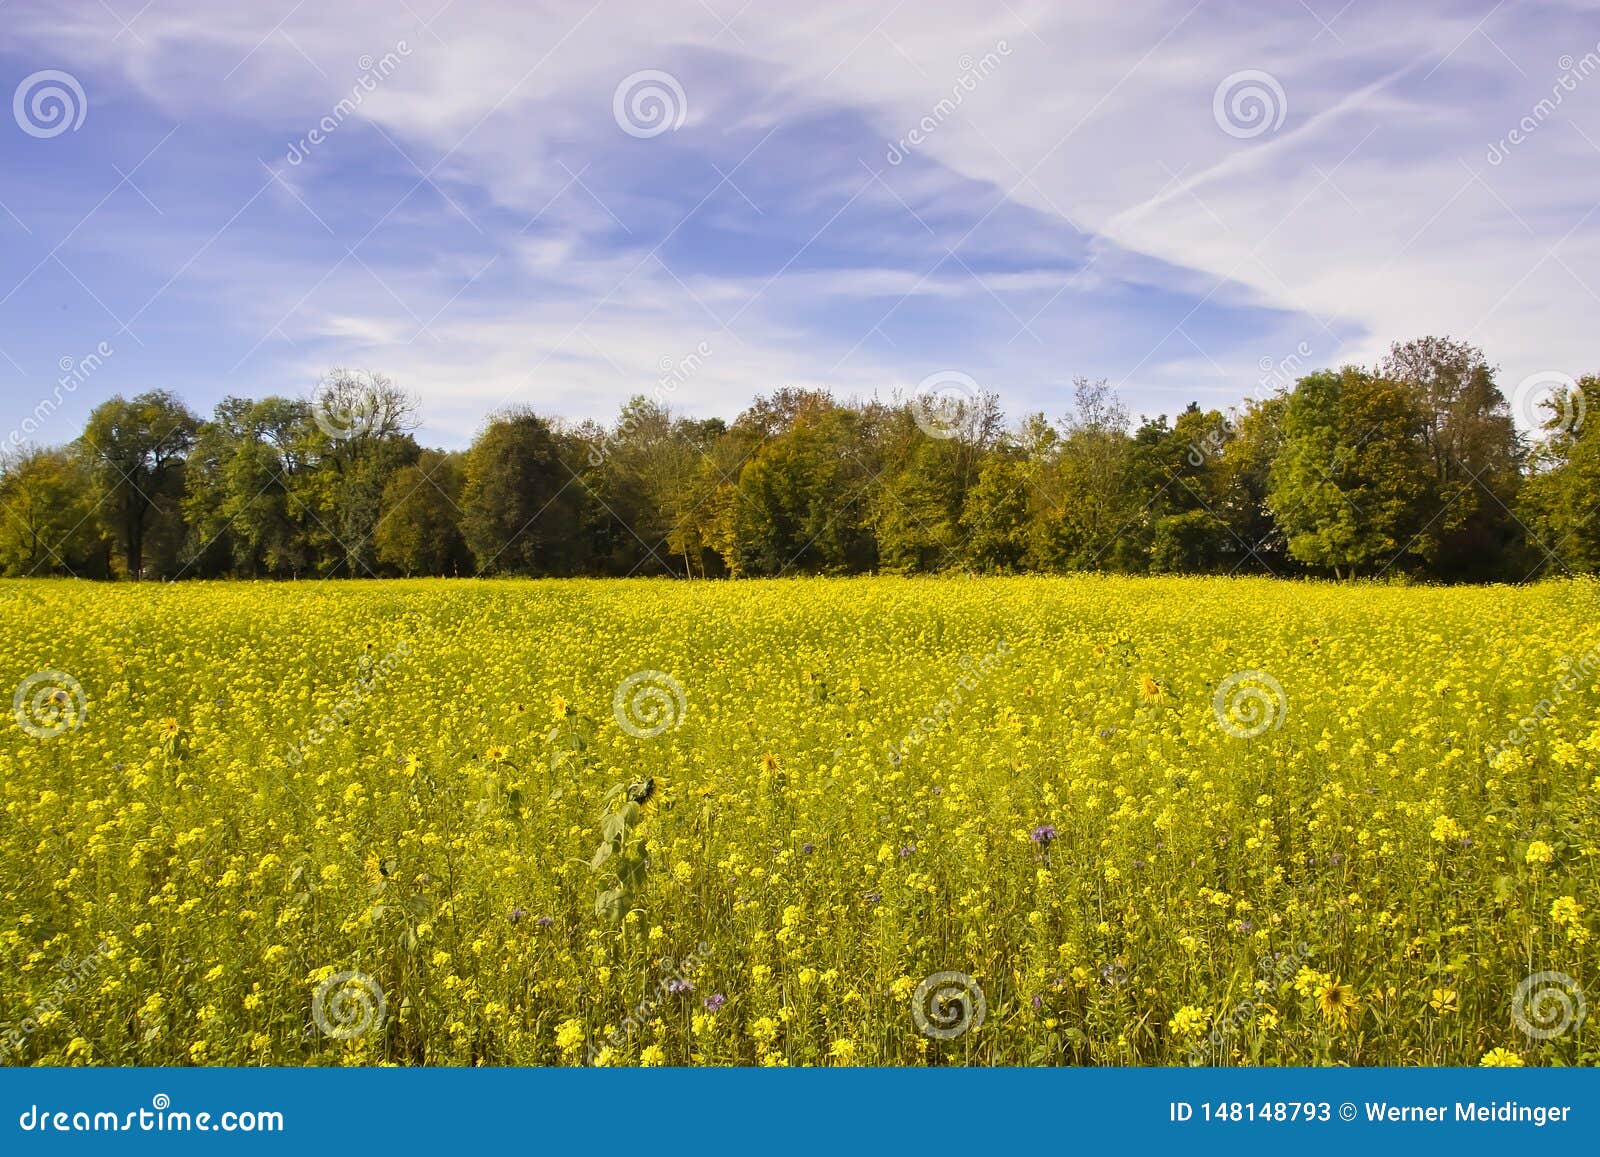 Yellow in Nature, Forest Edge in Front of Field with Thousands of Yellow  Flowers Stock Image - Image of flower, beauty: 148148793